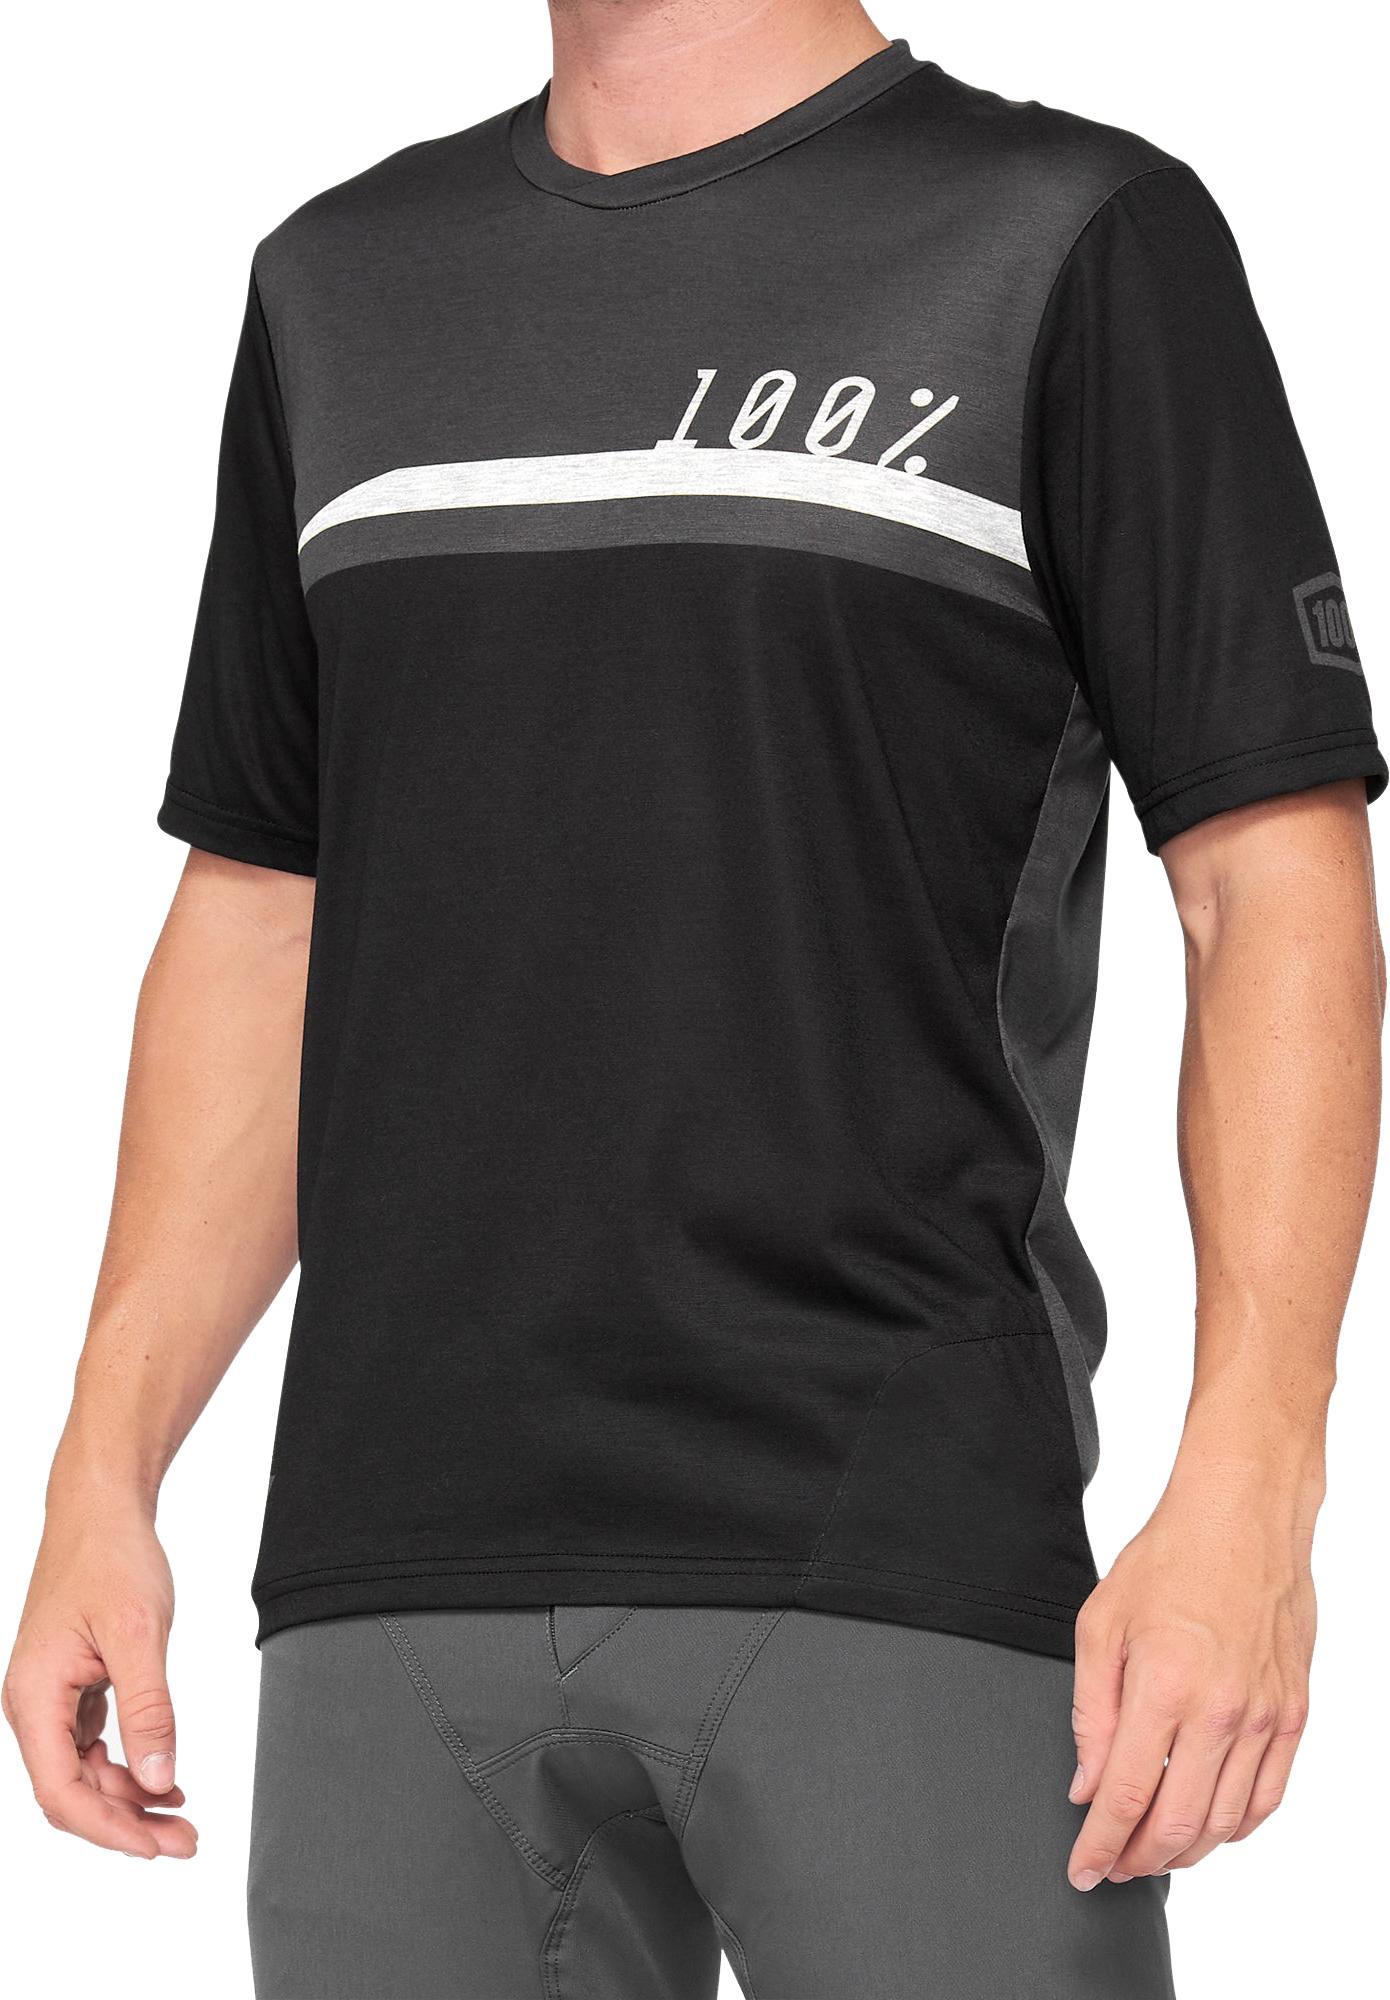 100% Airmatic Jersey 2021  Black/charcoal